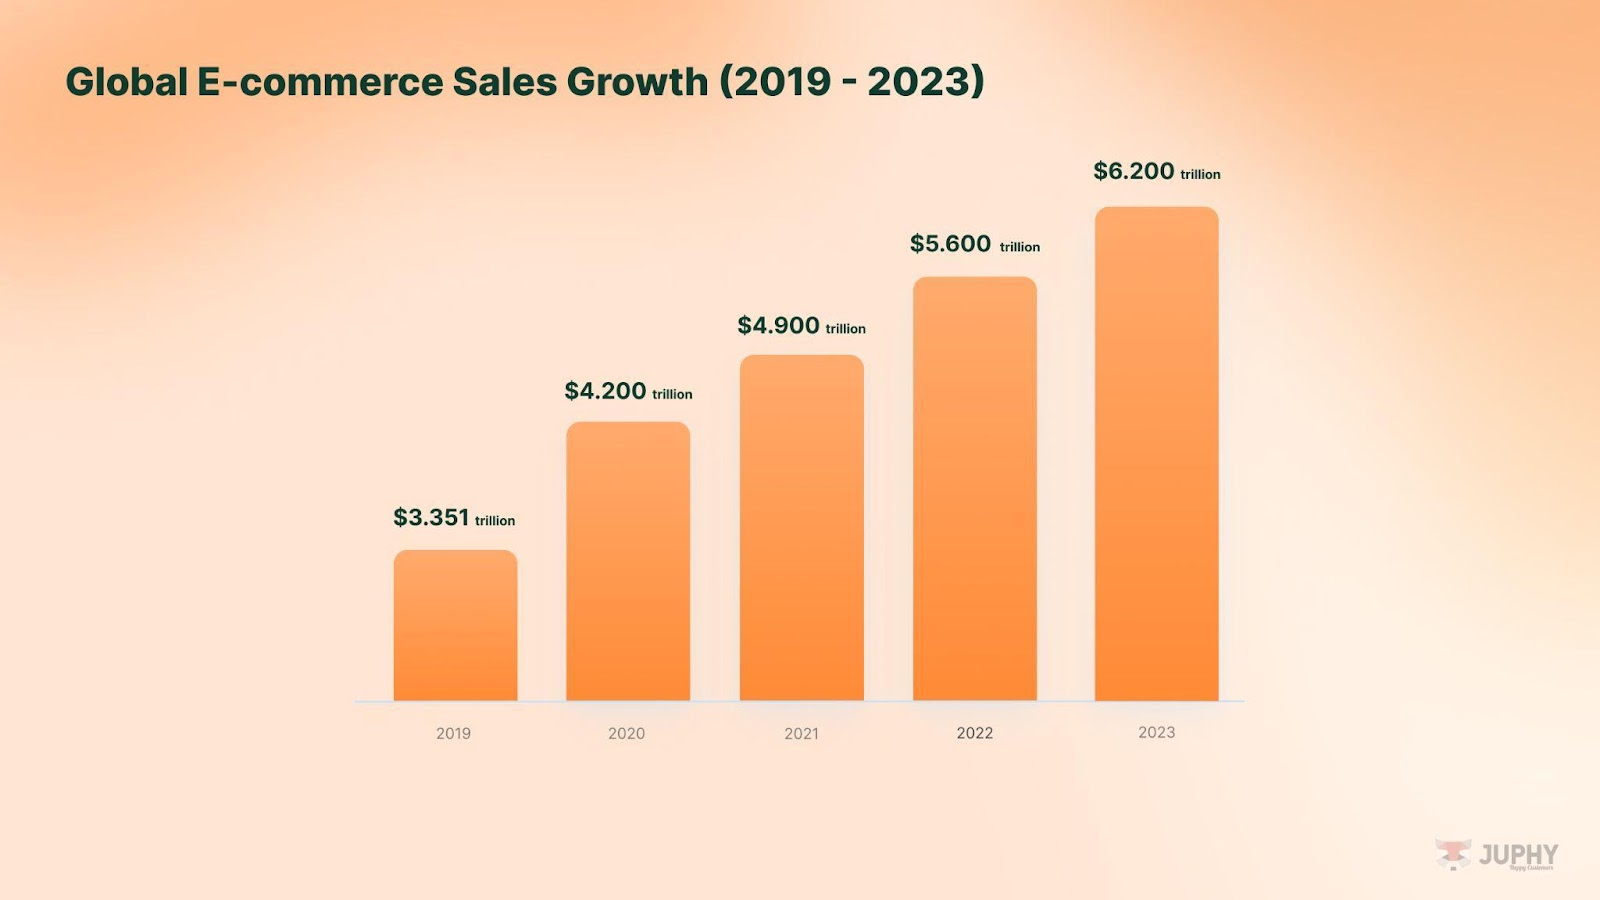 Global E-commerce Sales Growth (2019-2023) by Juphy